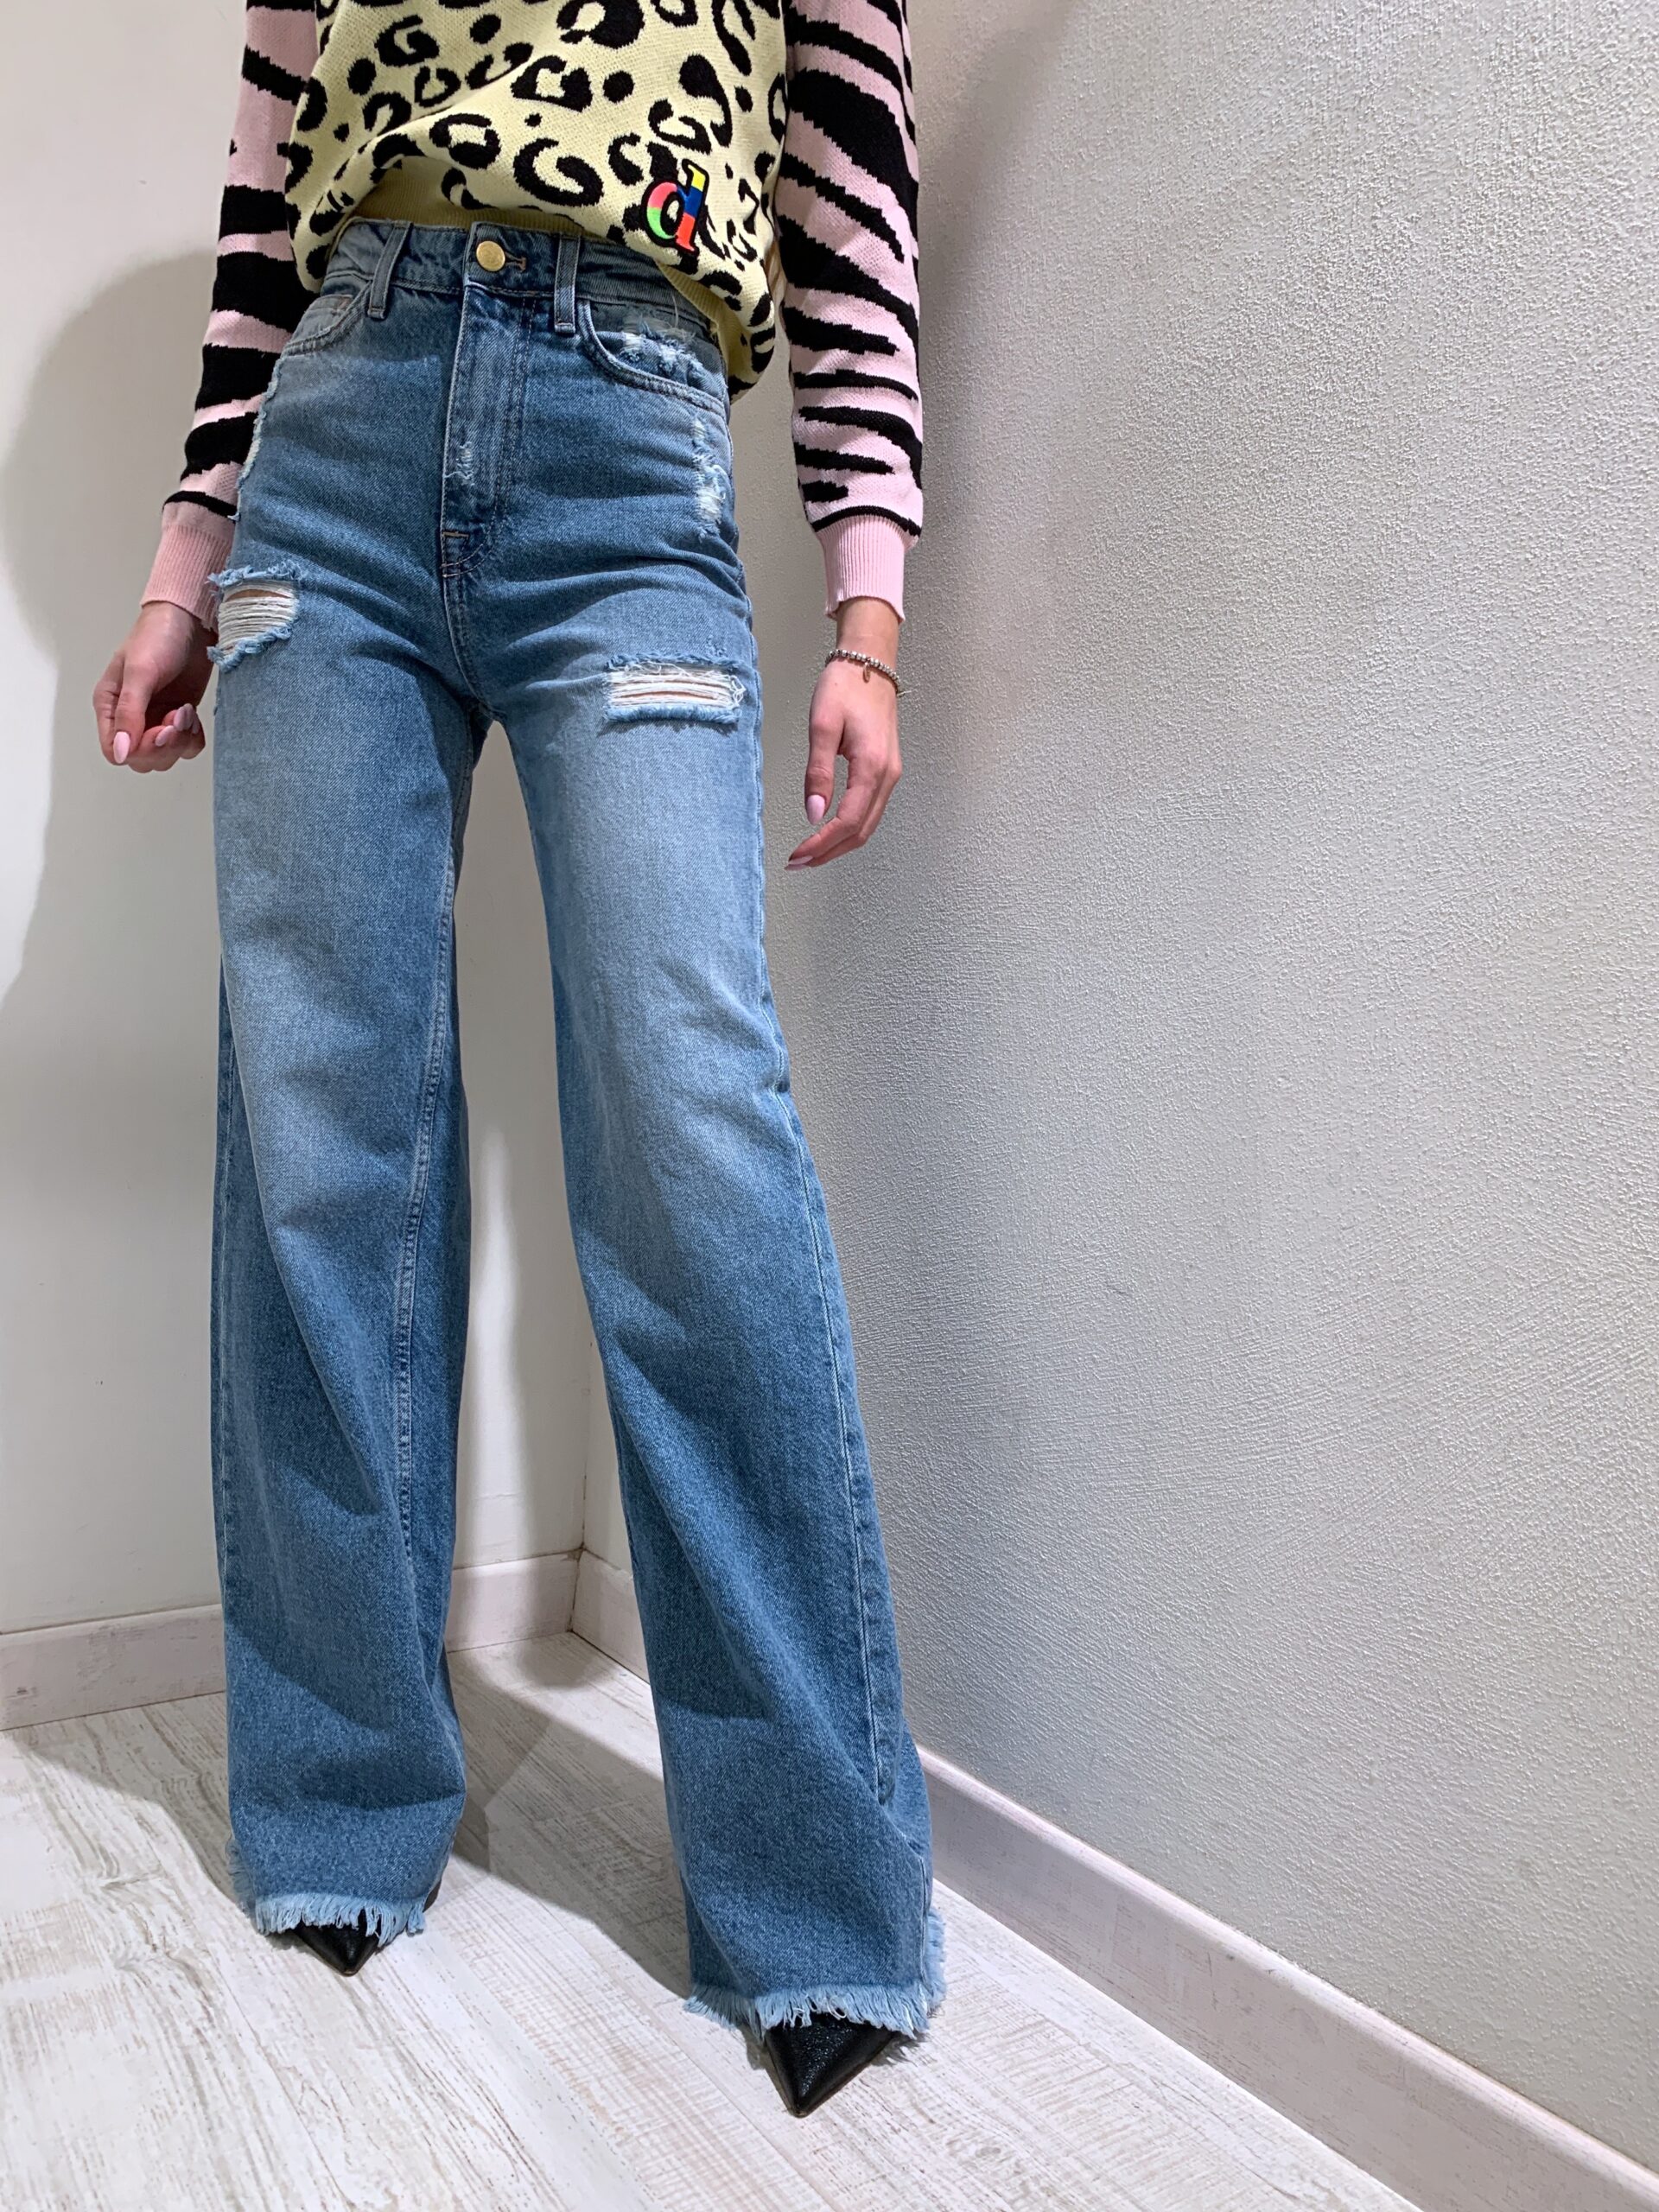 Giacca jeans donna cut out con taschine e rotture effetto vintage